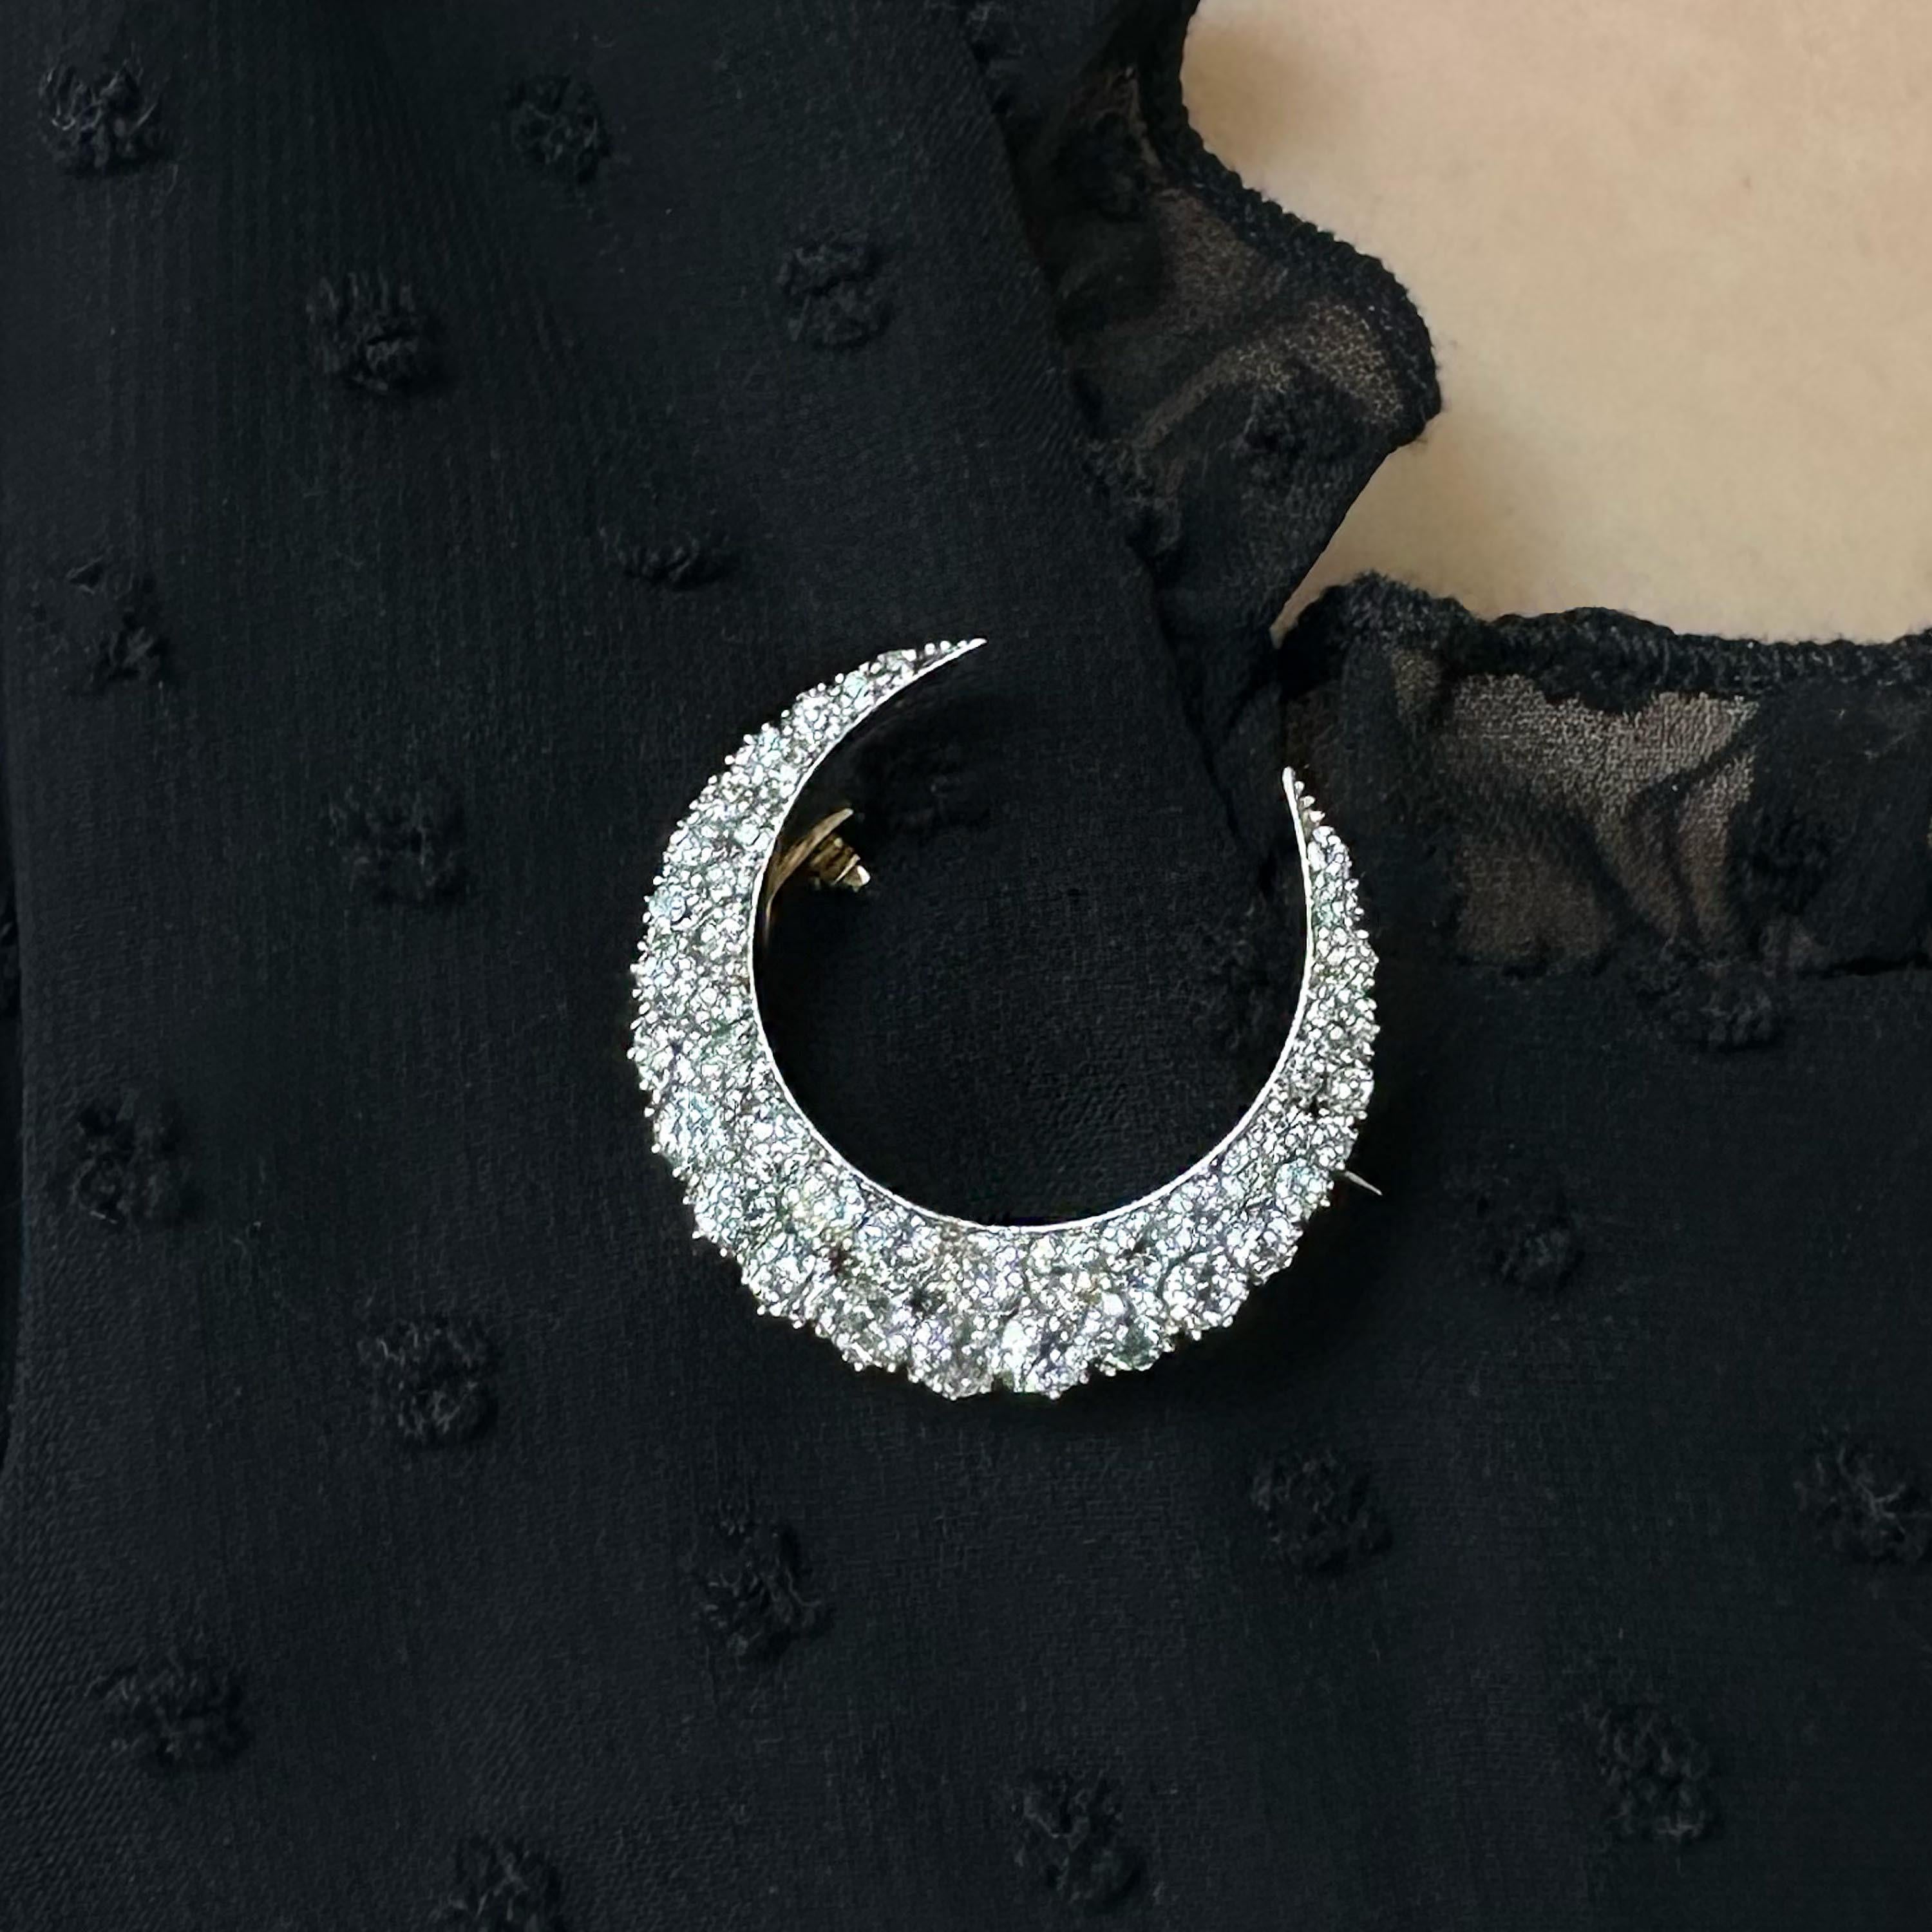 An antique crescent moon brooch, the body is set with two rows of old mine-cut diamonds, graduating in size, weighing an estimated total of 4.00 carats, grain set in silver, with a plain inner curve and cut down set outer curve, with gold gallery